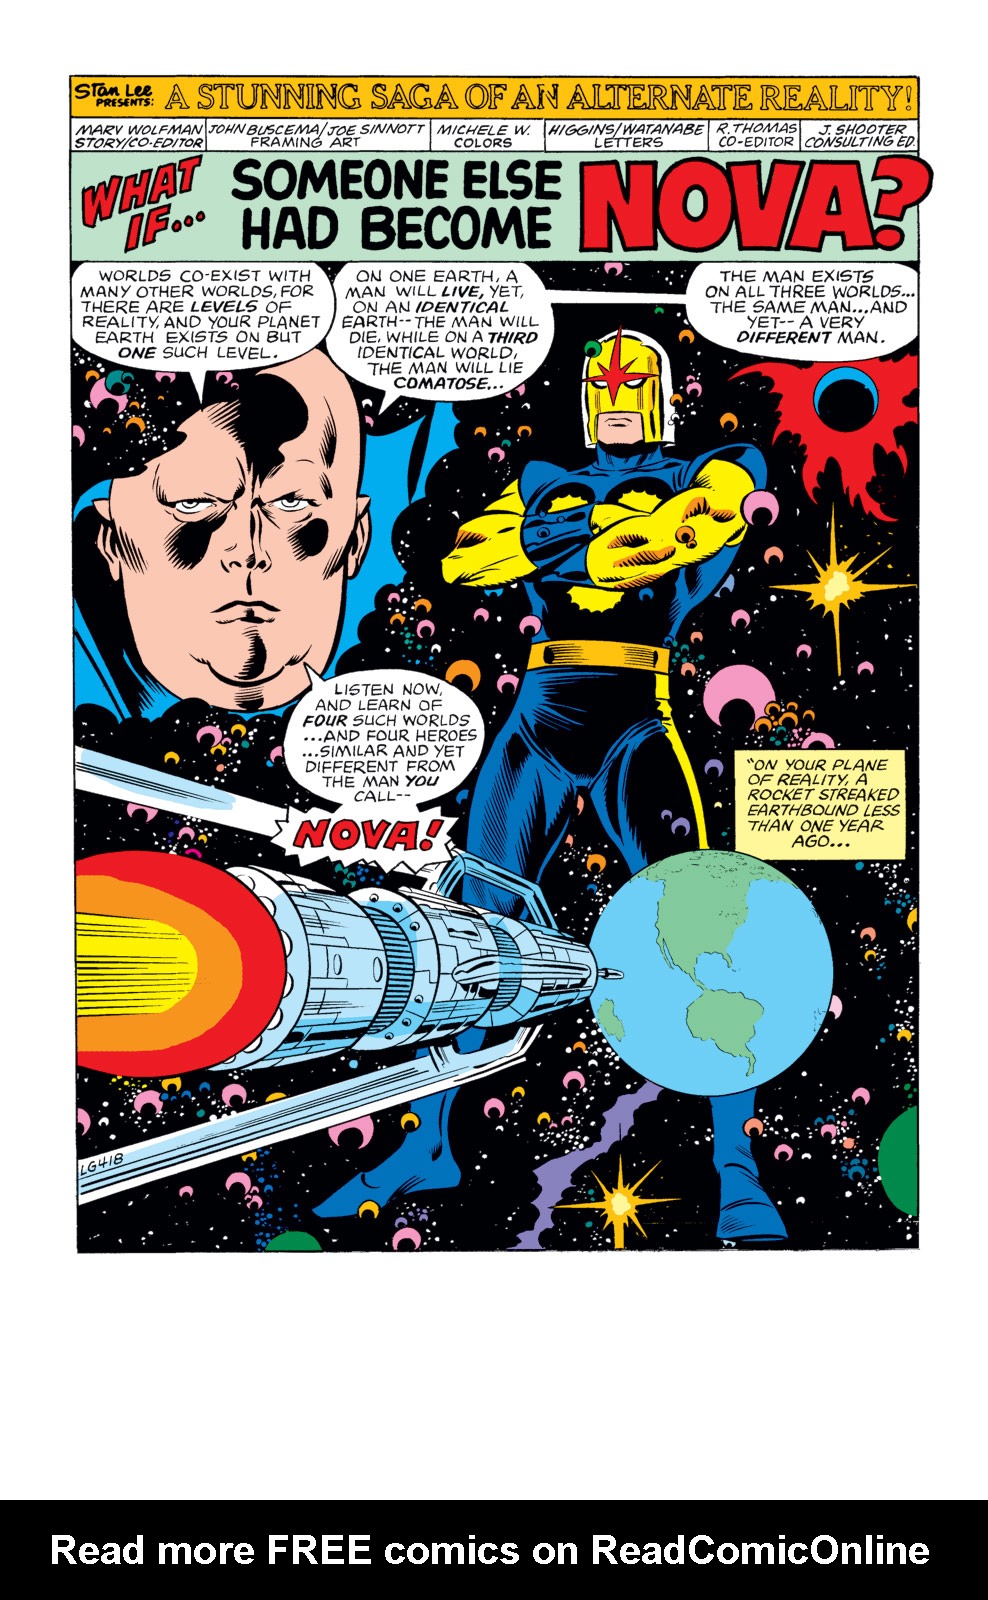 What If? (1977) issue 15 - Nova had been four other people - Page 2